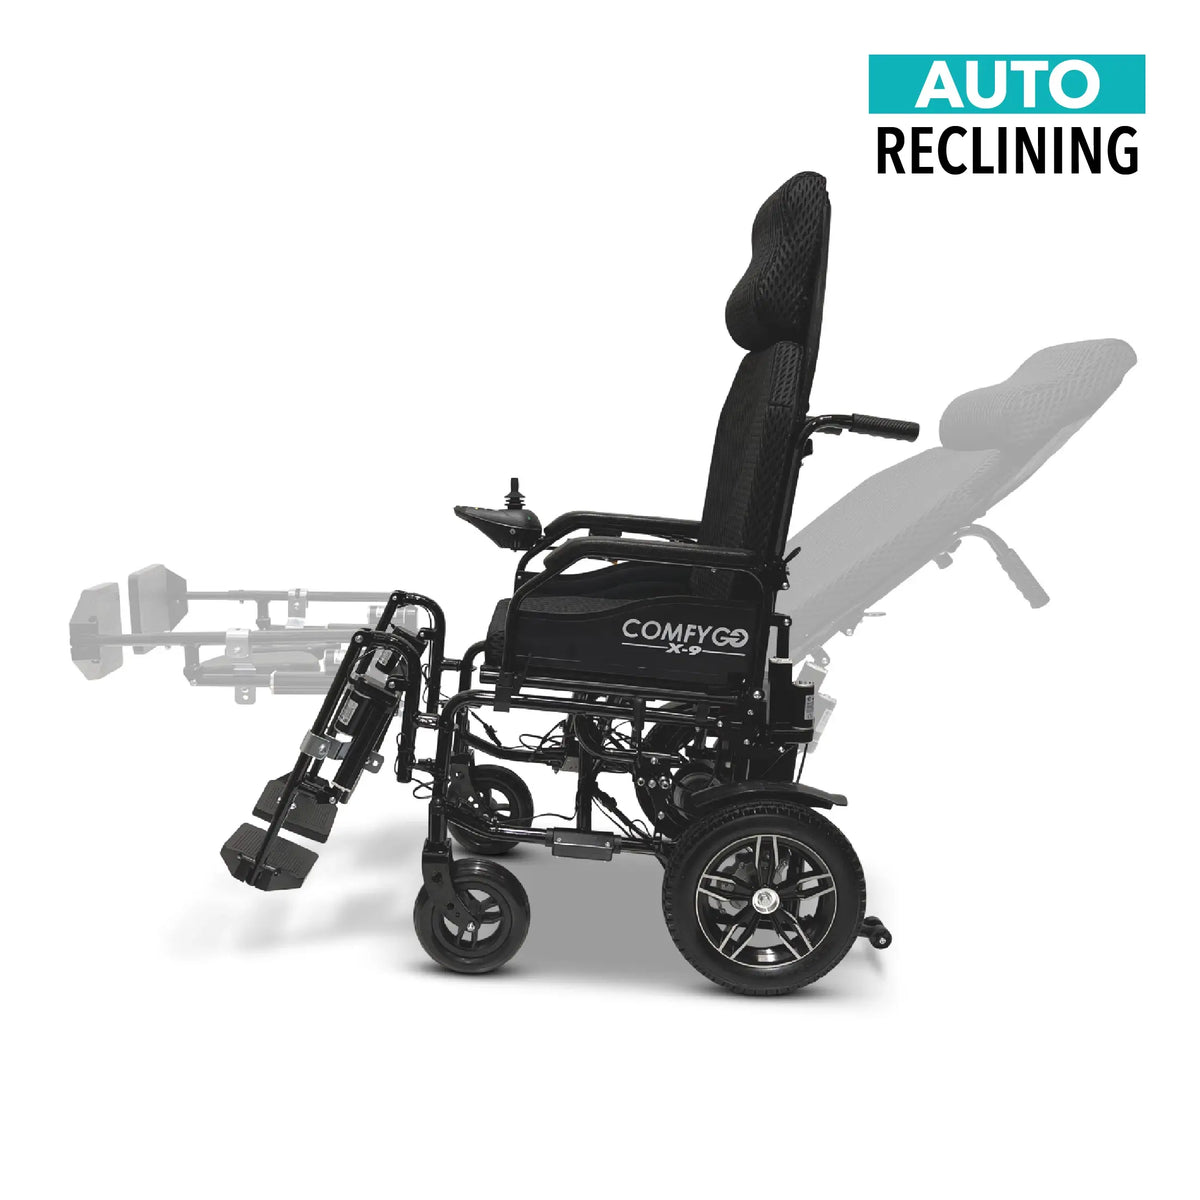 X-9 Remote Controlled Electric Wheelchair, Automatic Reclining Backrest & Lifting Leg Rests